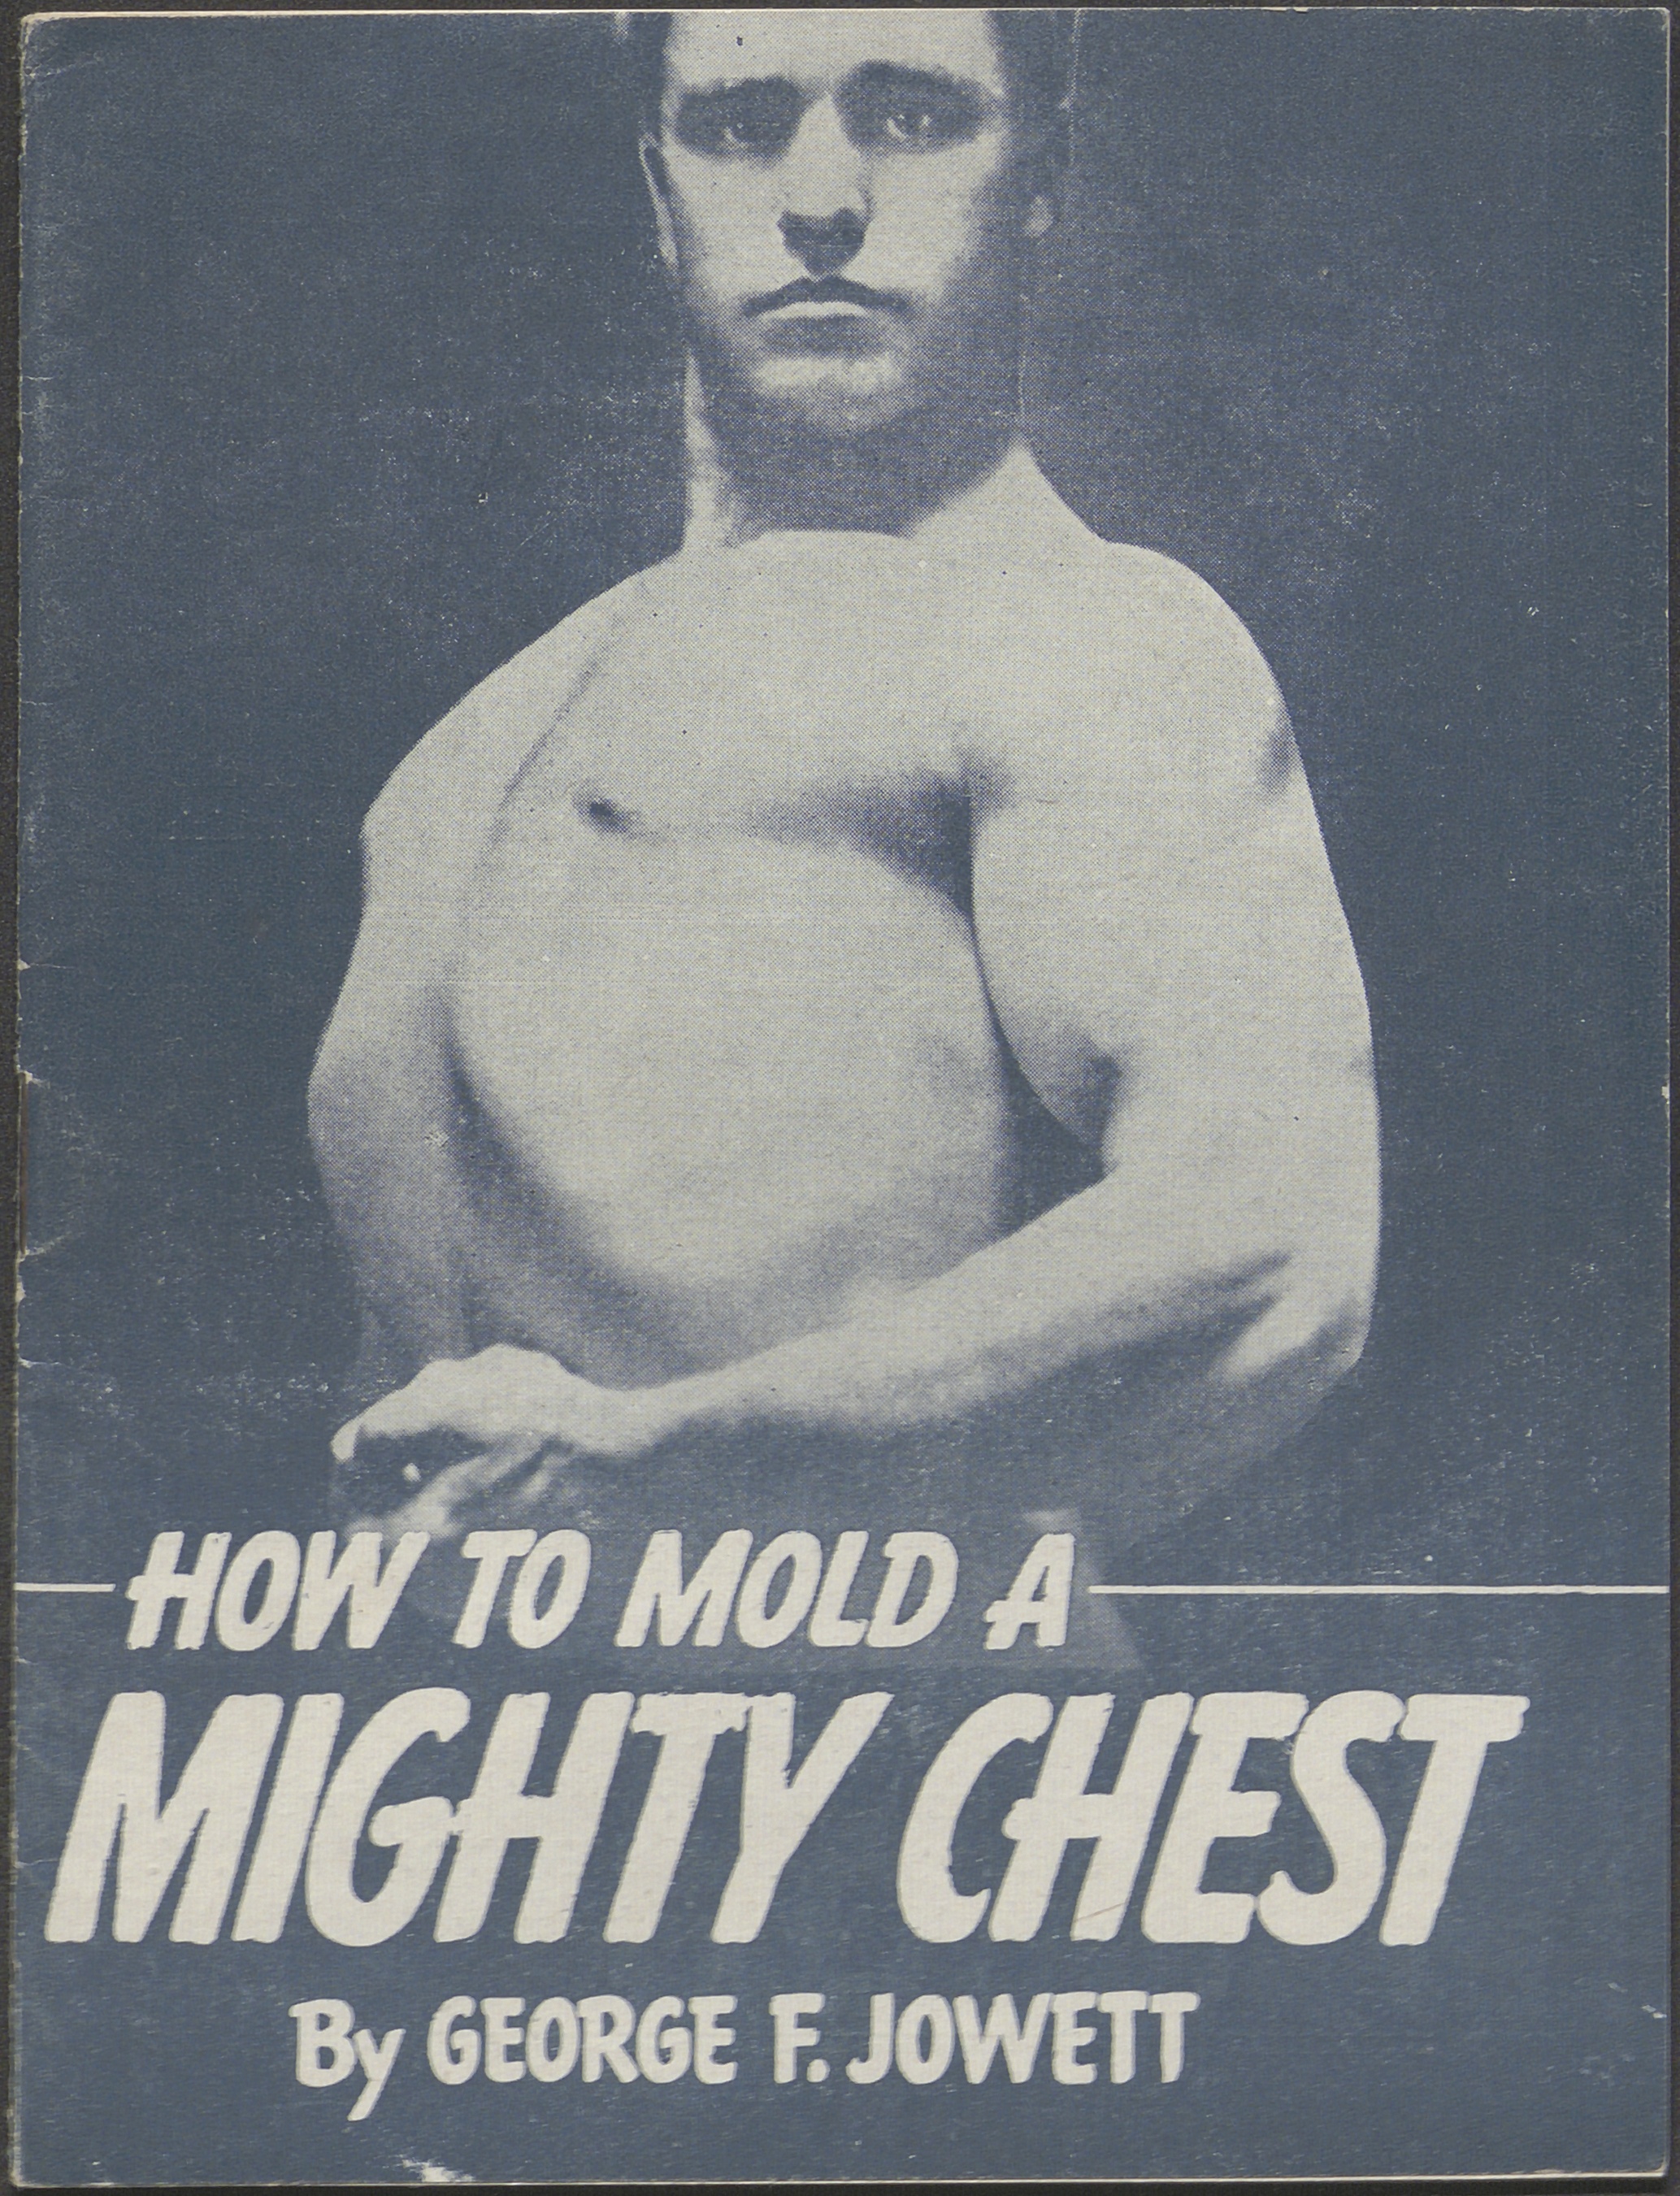 Cover of a "How to Mold a Mighty Chest', featuring a black and white photo of a shirtless man.